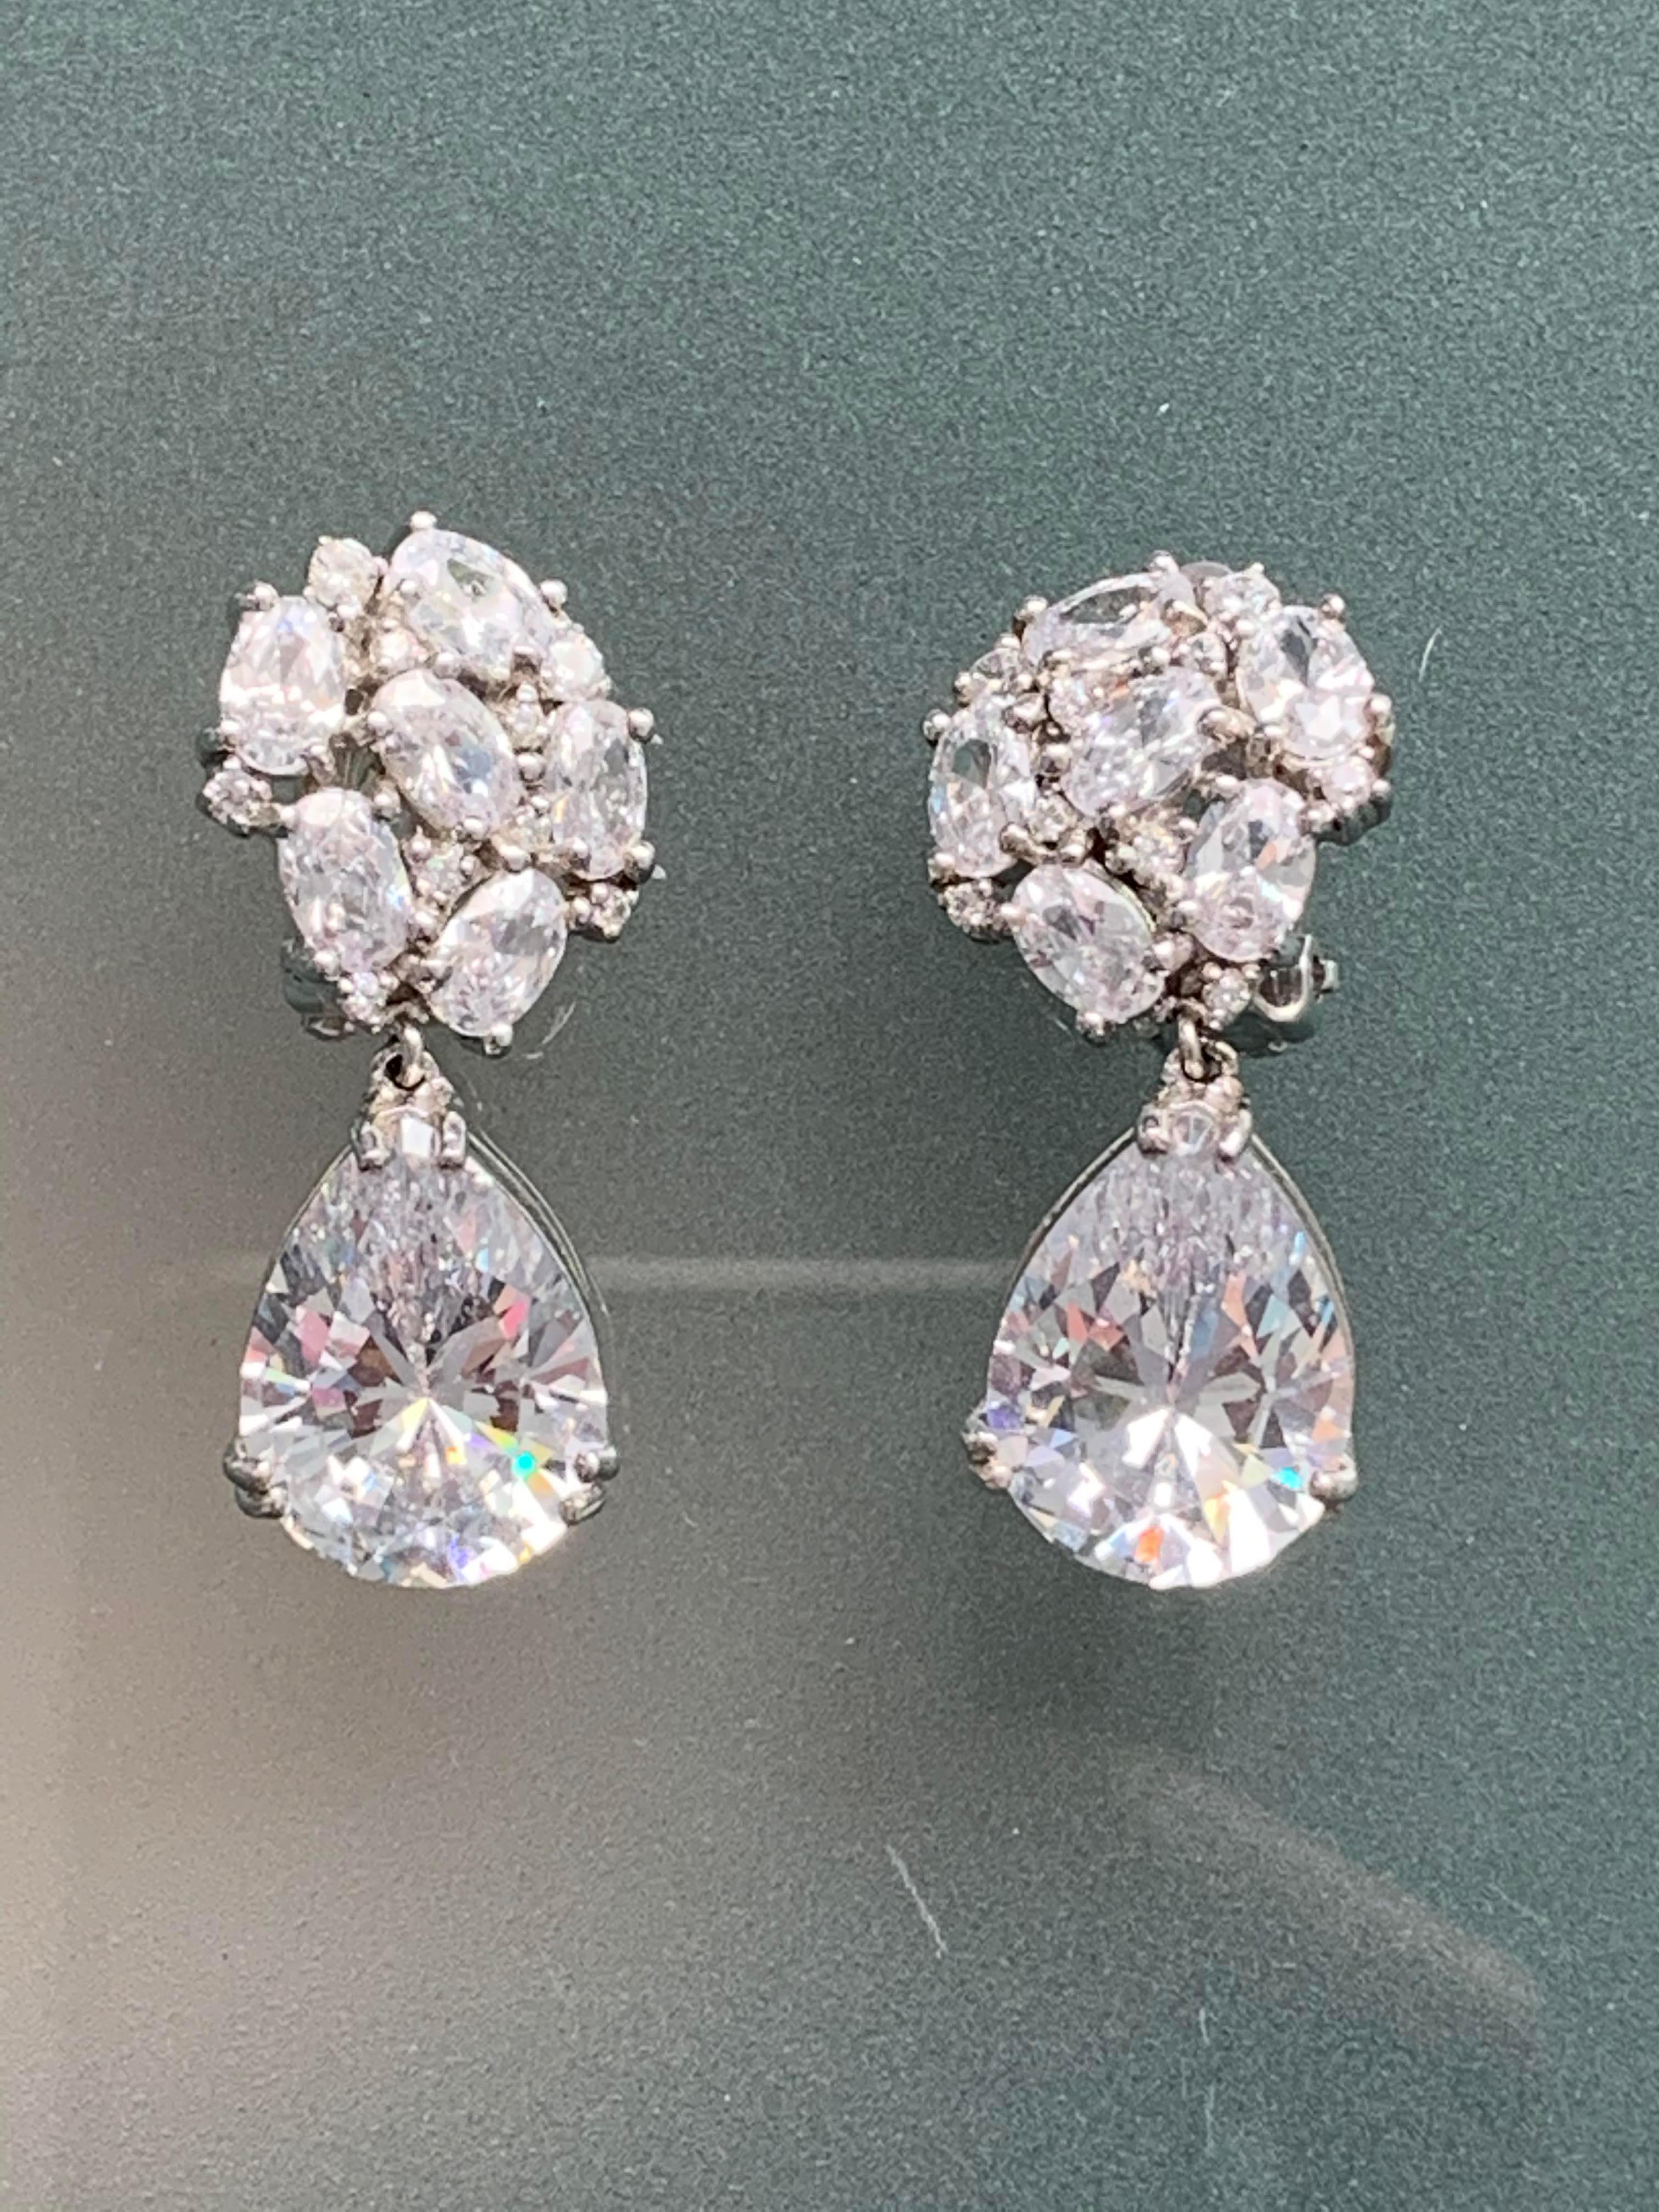 Stunning Runway Faux Diamond Drop Earrings, crafted in platinum plated sterling silver and encrusted with sparkling CZ. The pear shape drops are each equal to 6ct in size top quality Cubic Zirconia. The earrings give a lot of bling. Top Round